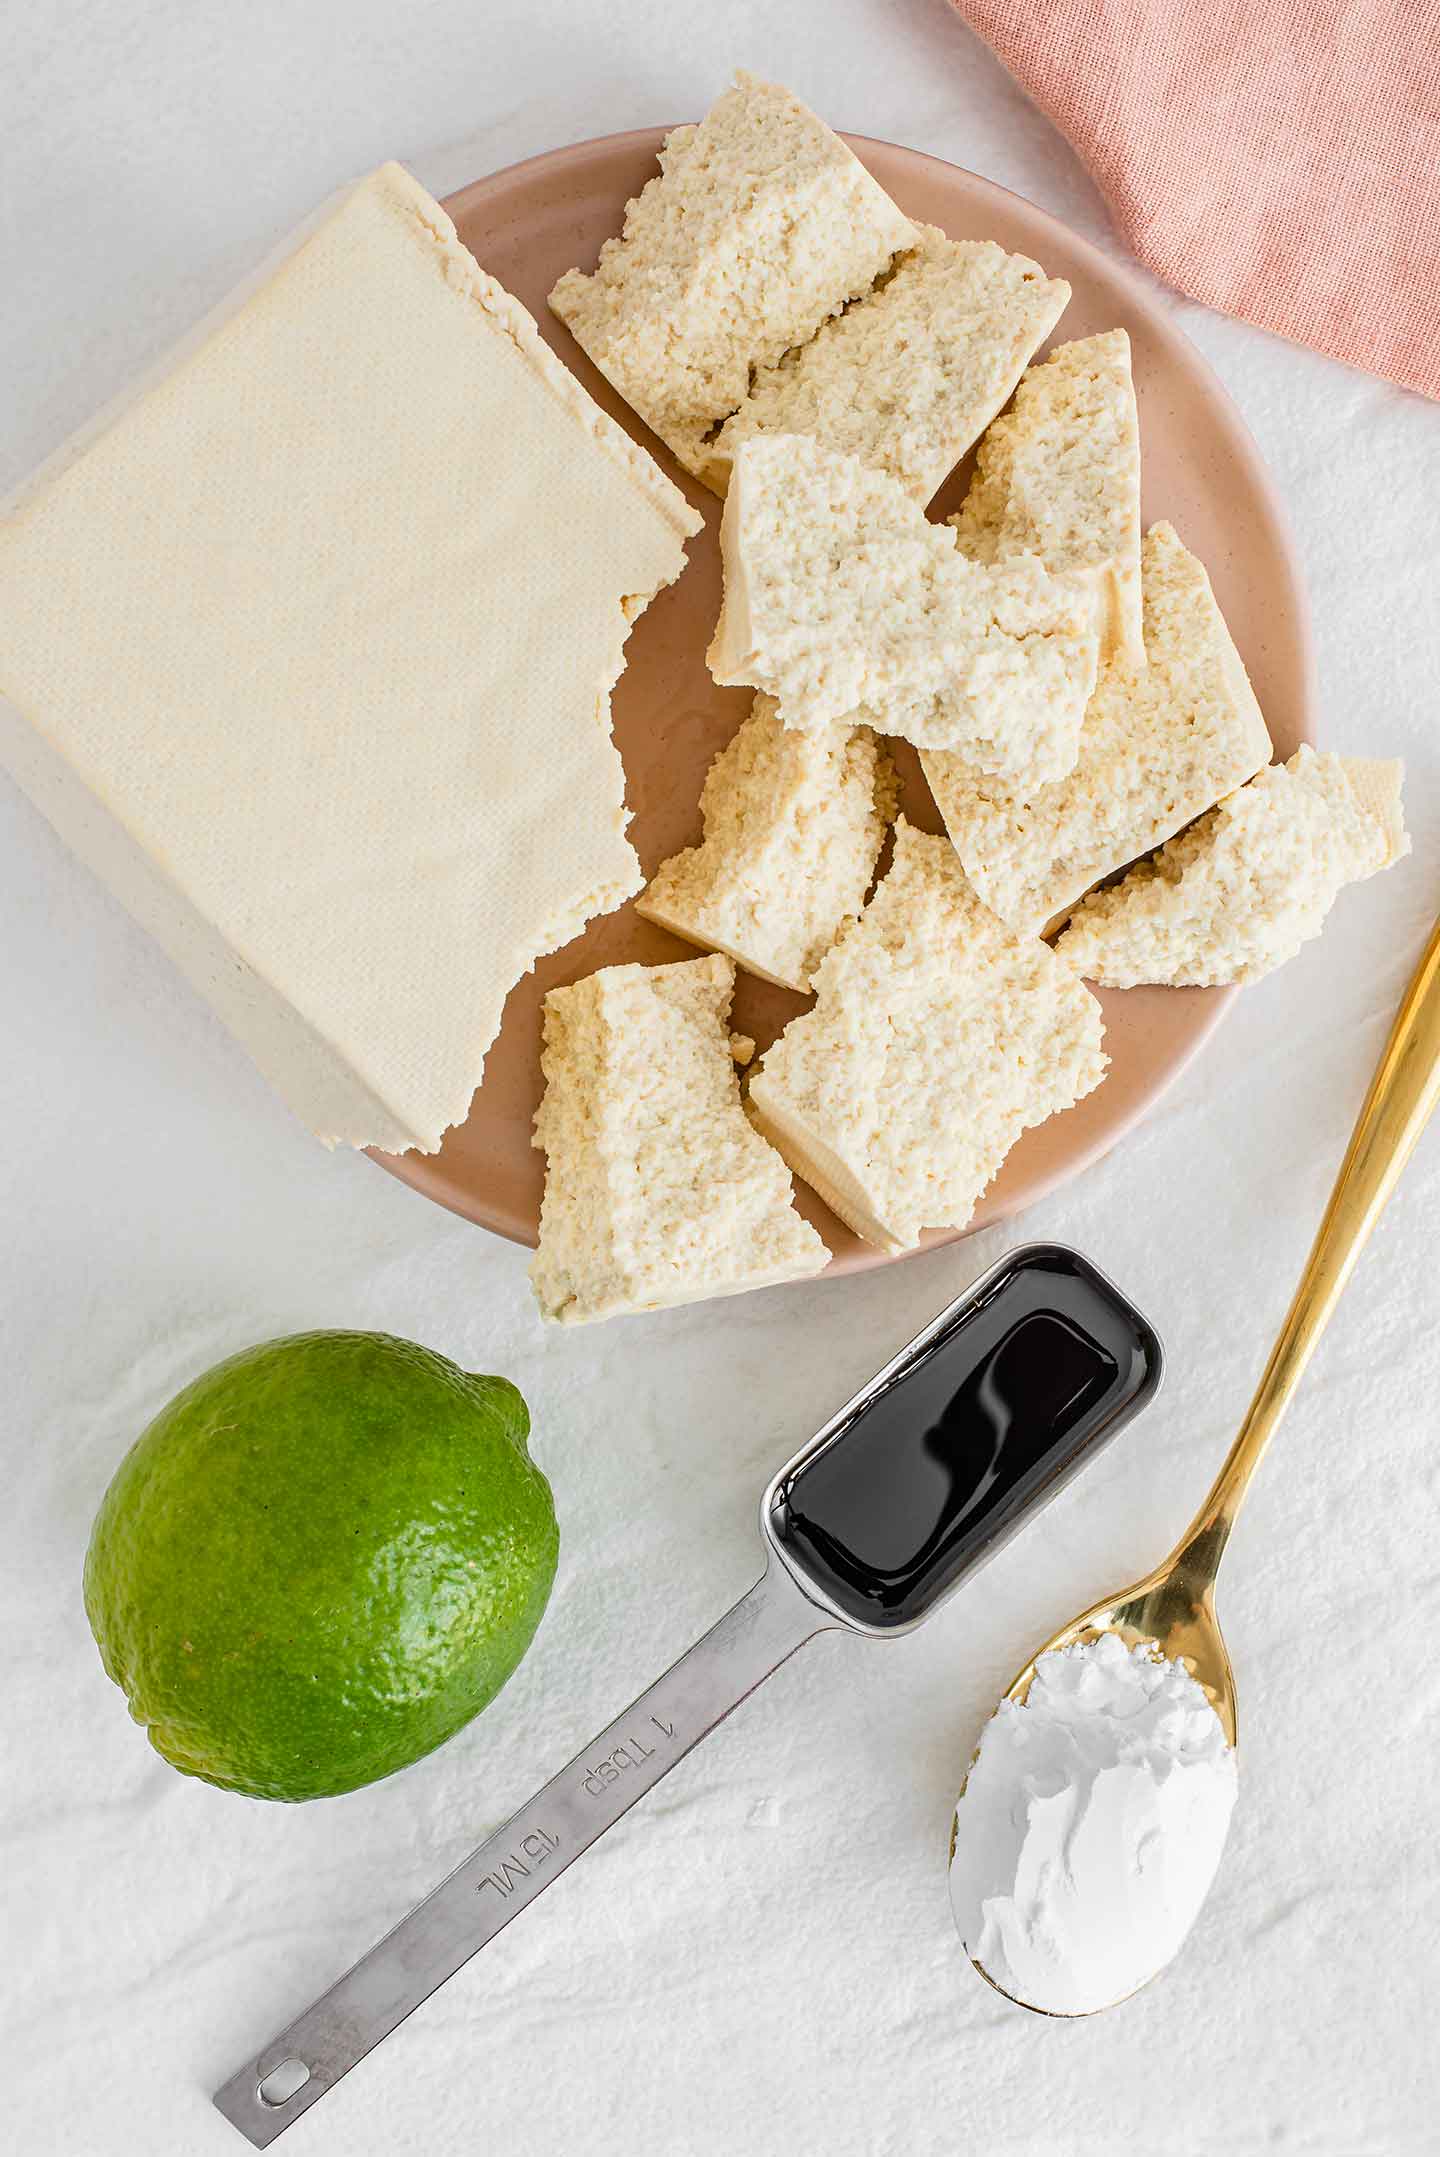 Top down view of a block of extra firm tofu pulled apart into uneven pieces. A fresh lime, tamari, and a spoon of starch rest beside the pieces.